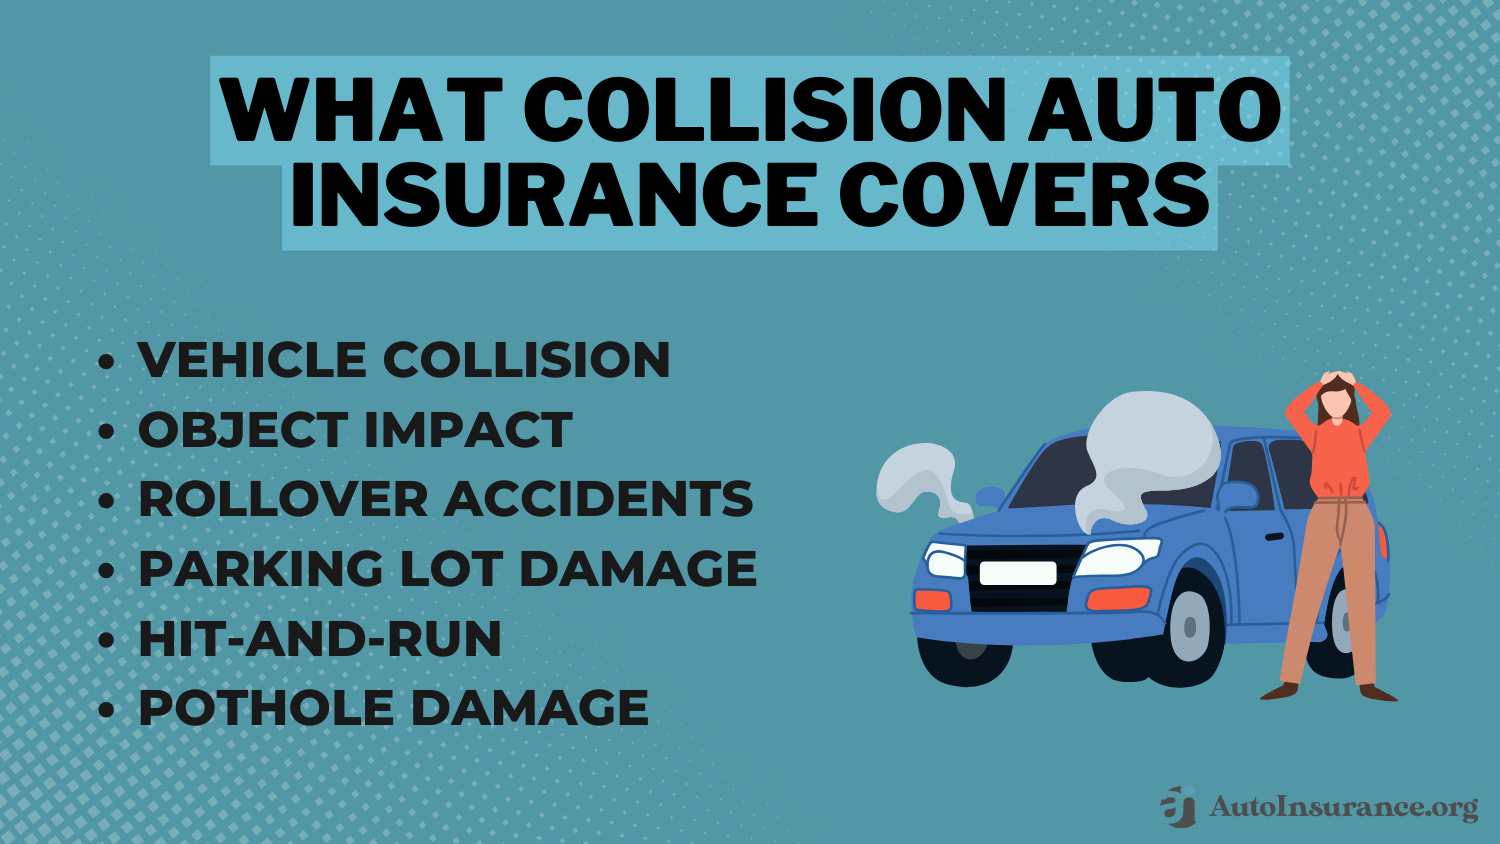 Does my auto insurance cover rental cars?: What Collision Auto Insurance Covers Infographic